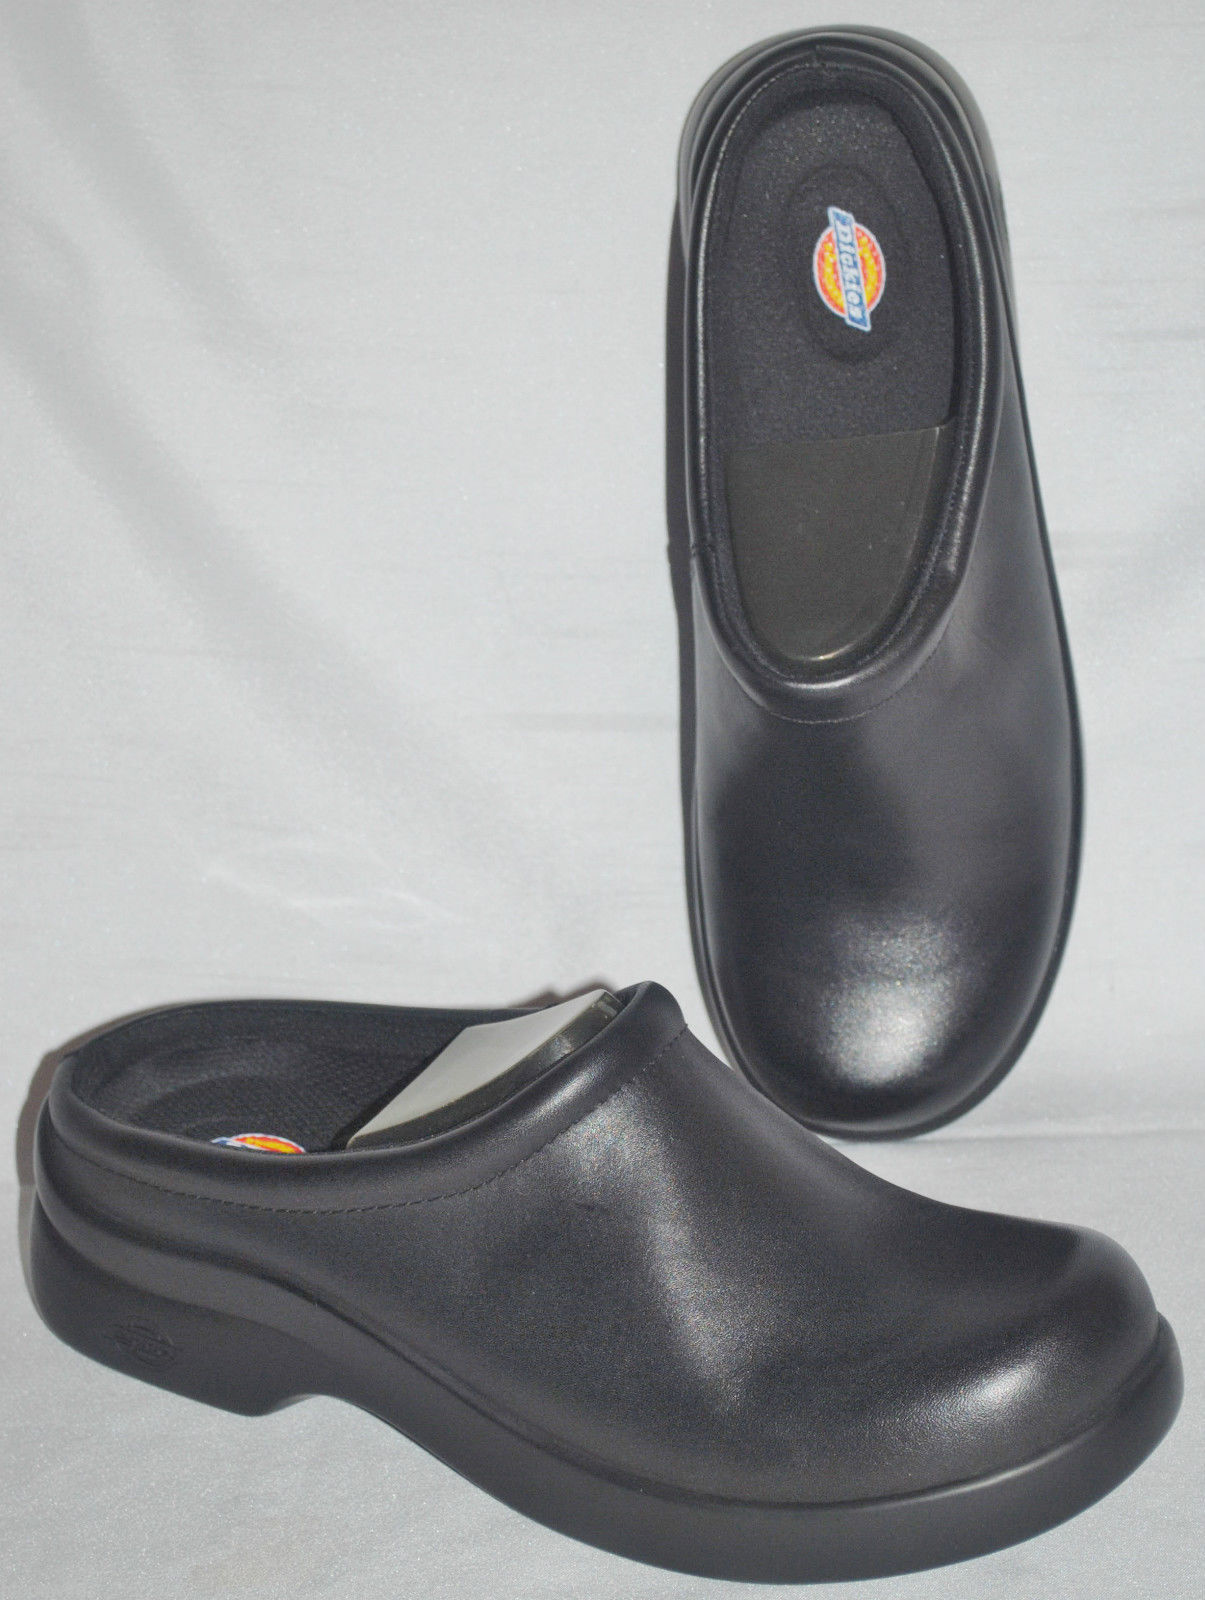 Primary image for Dickies Jennie Leather Nursing Clogs NIB in Black or White Women's 10 or 11